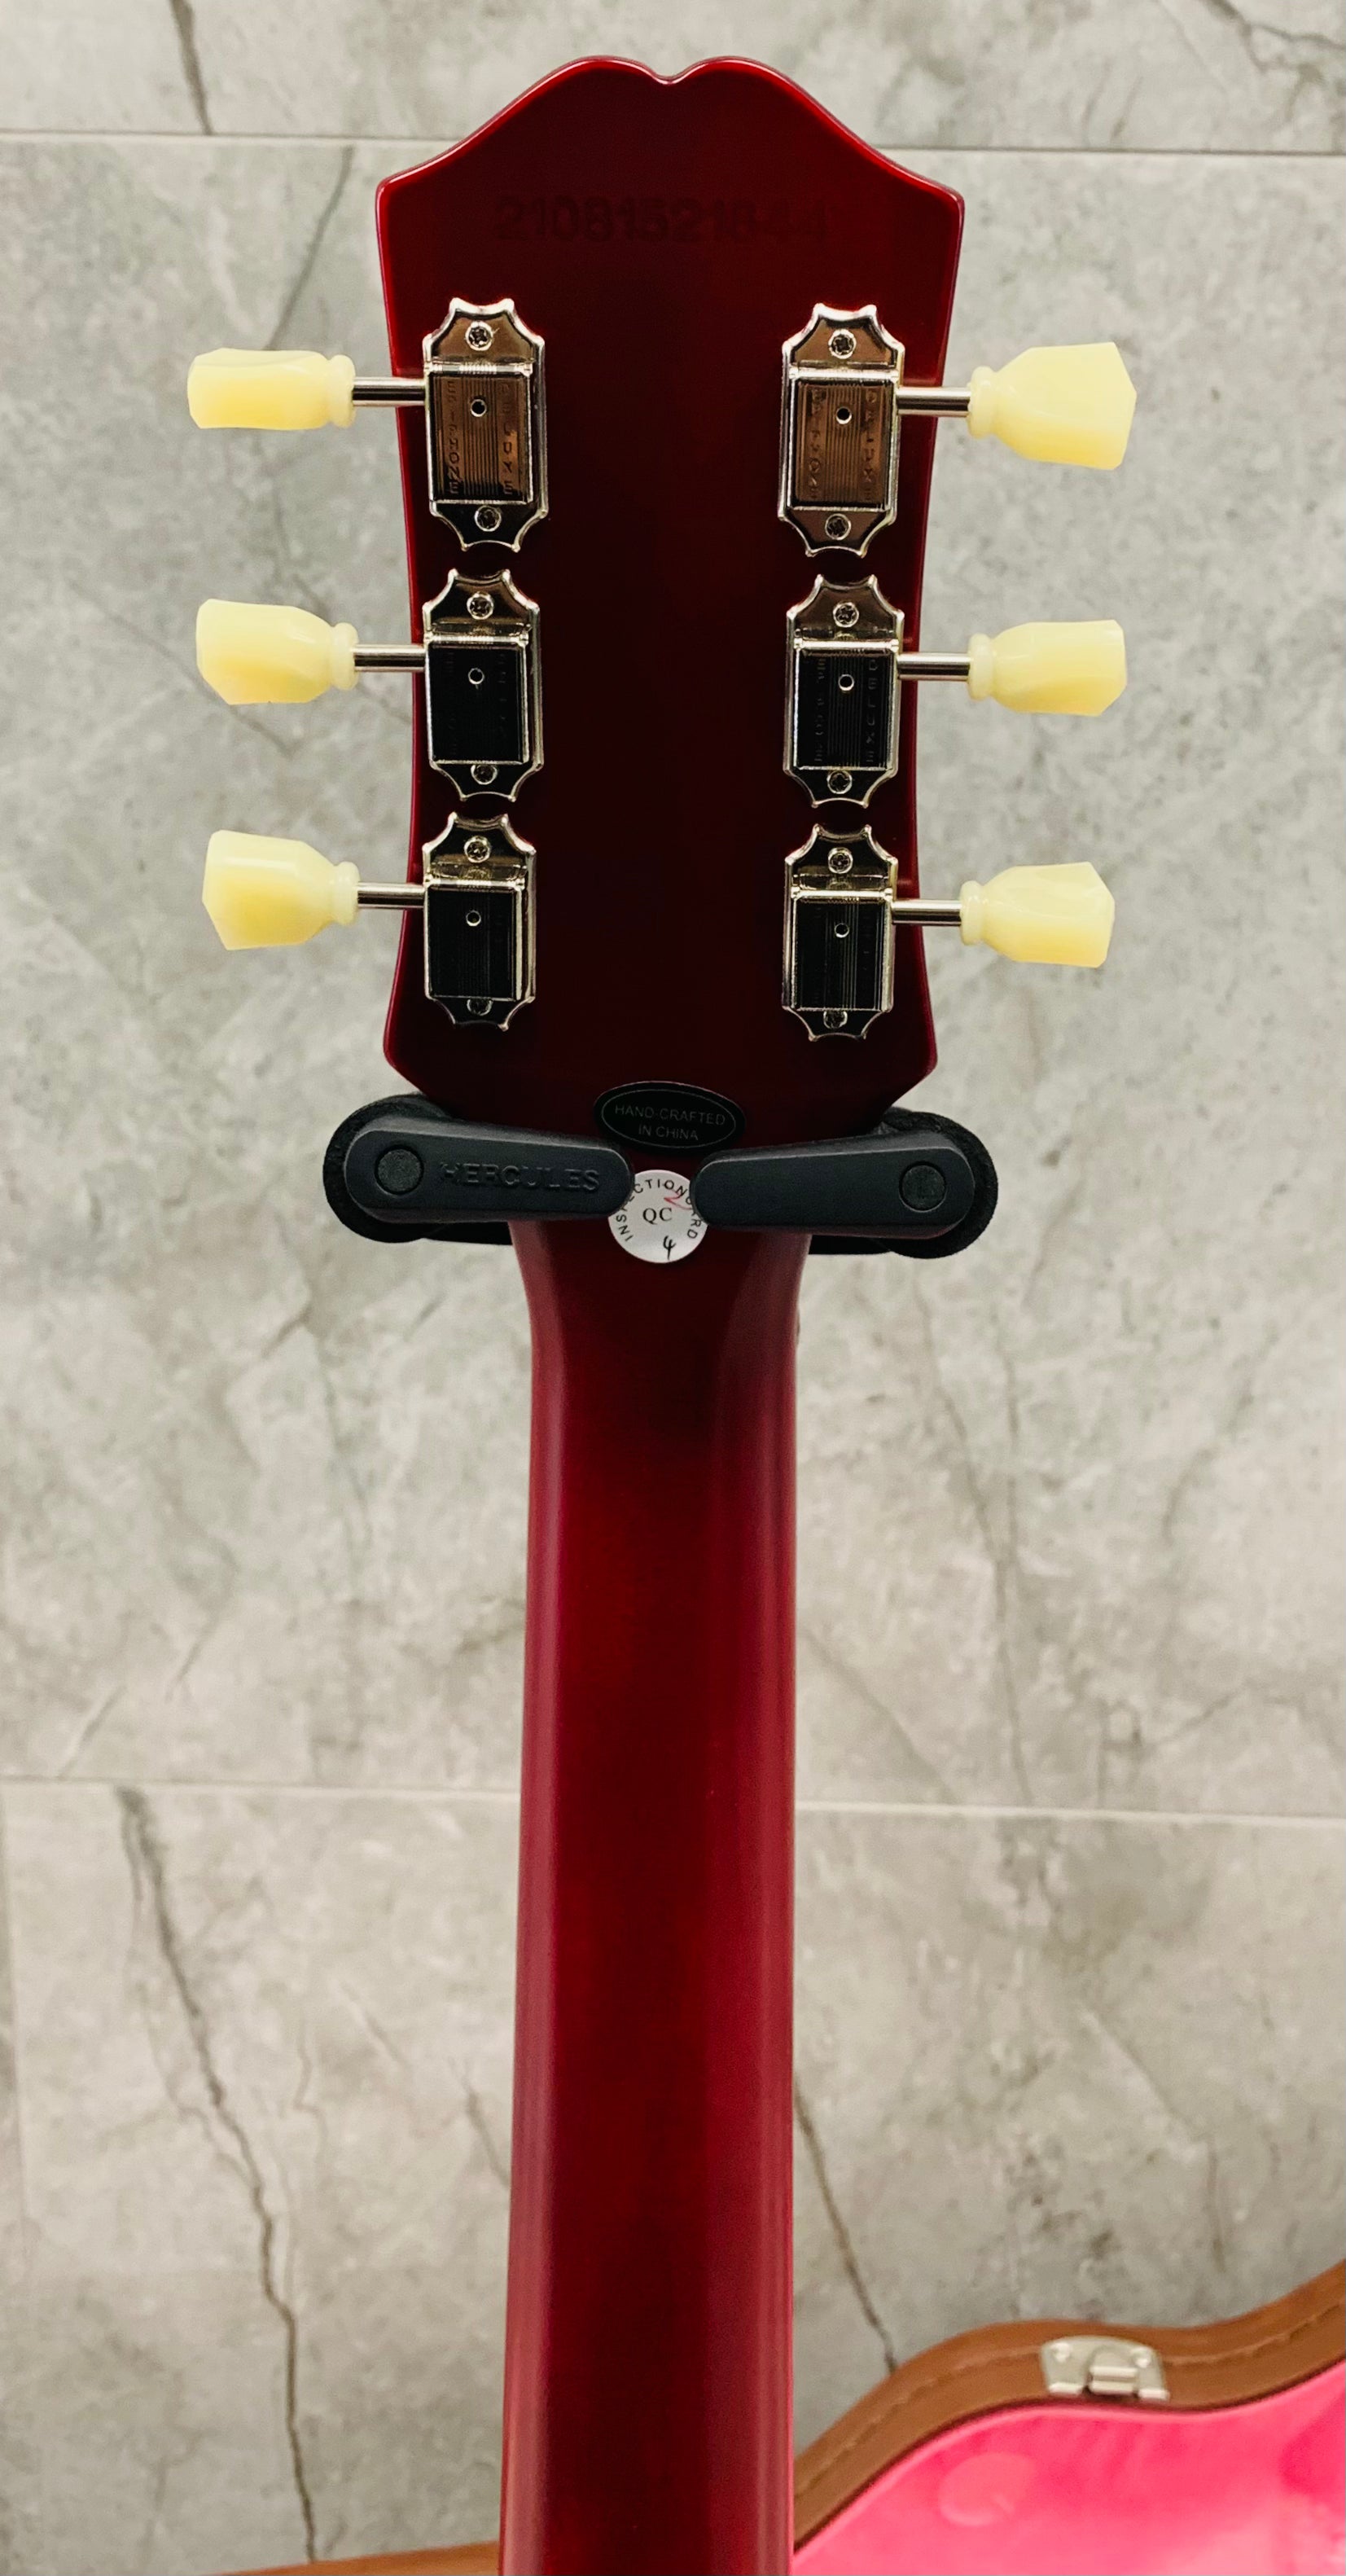 Epiphone Limited Edition 1959 Les Paul Standard 59 EL59ADCNH – Aged Dark  Cherry Burst SERIAL NUMBER 21081521644 - 8.8 LBS